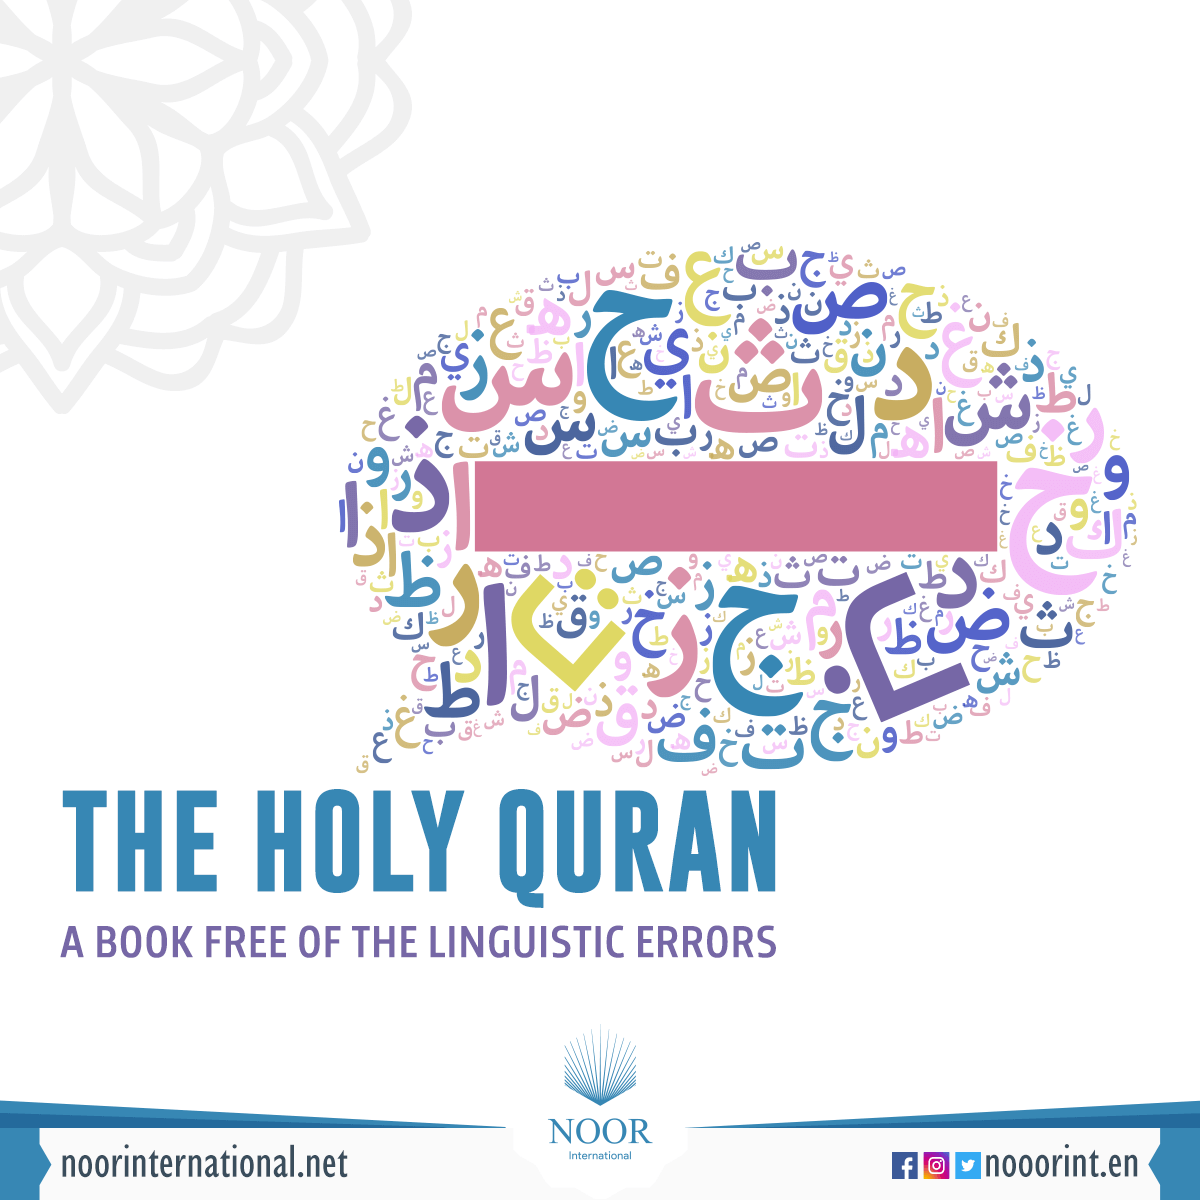 The Holy Quran .. A book free of the linguistic errors